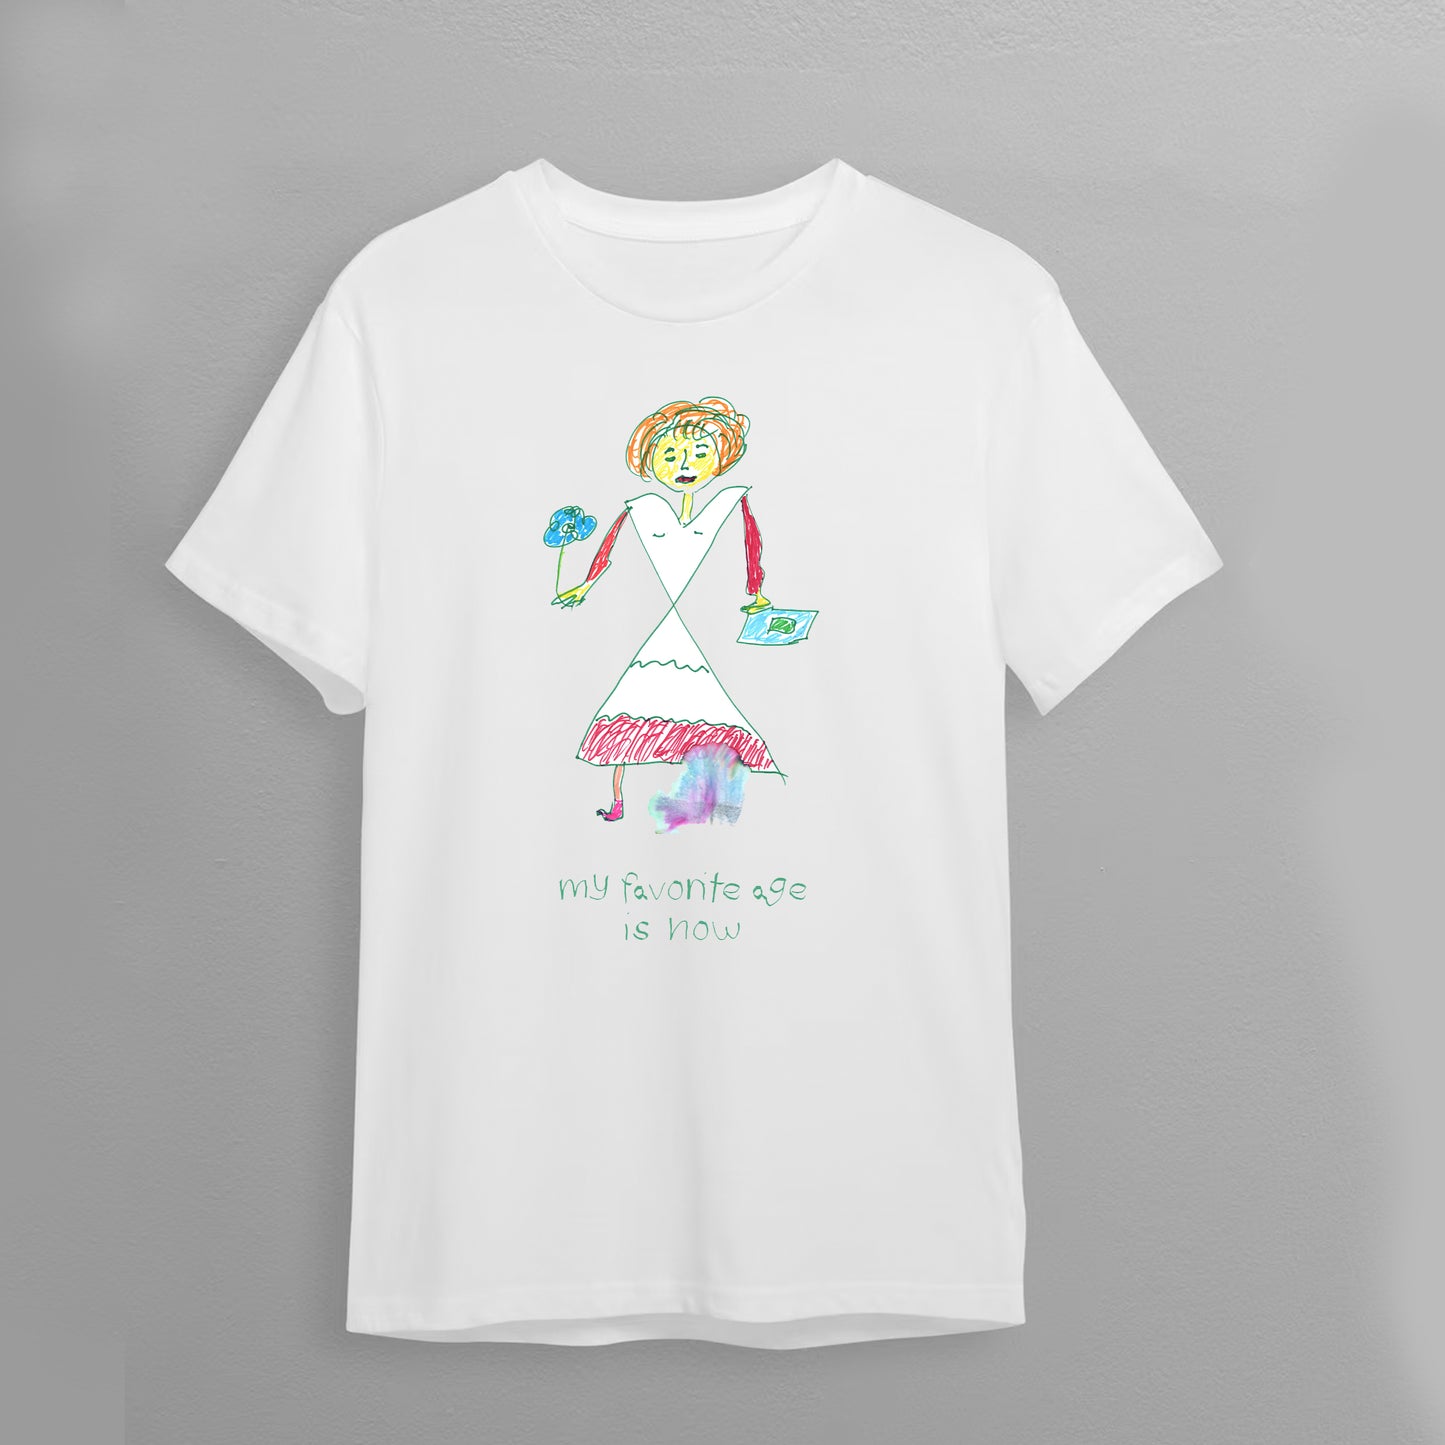 T-Shirt "My favorite age is now"